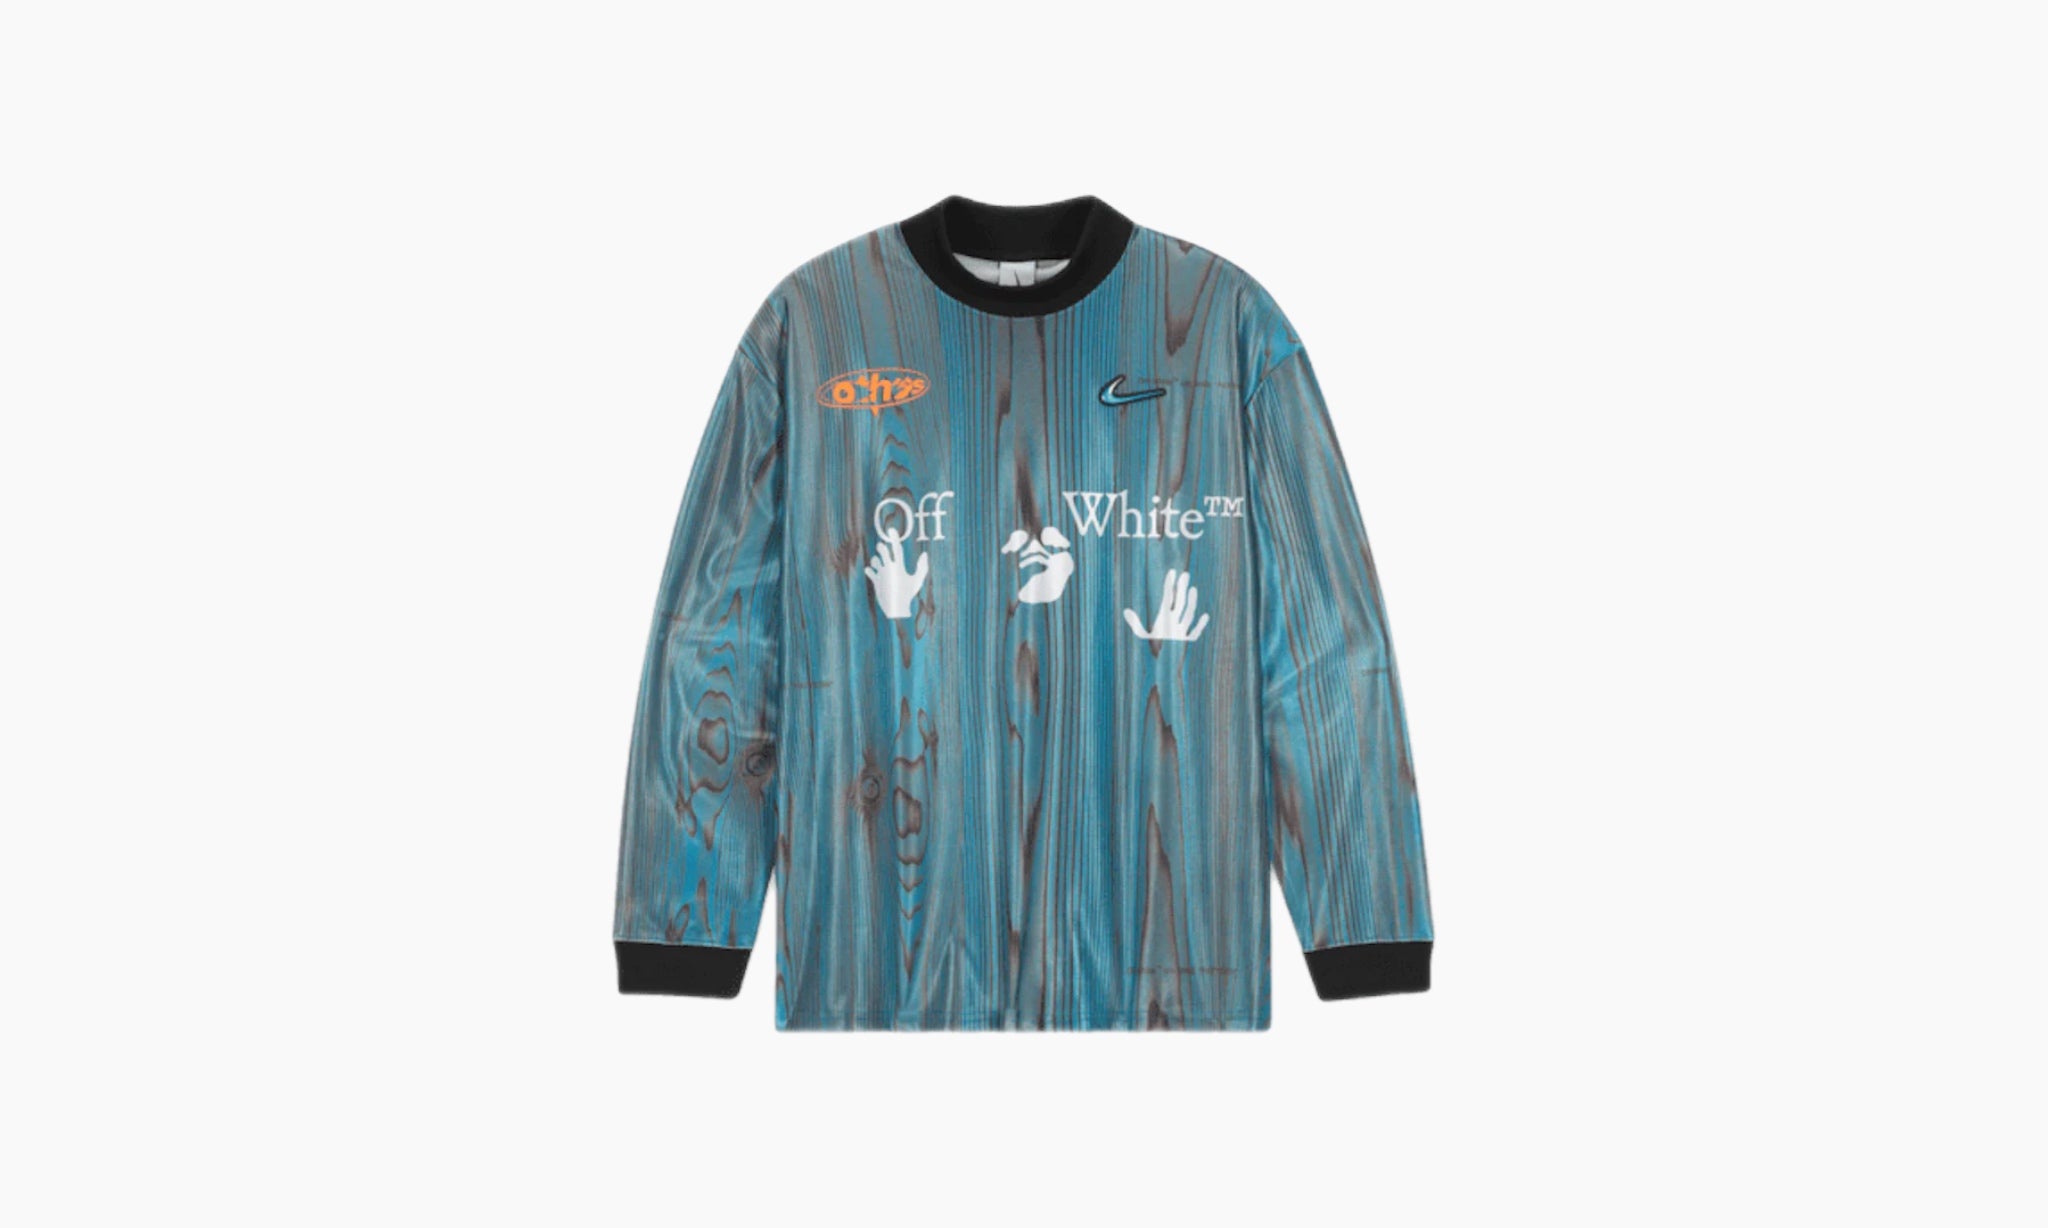 Off-White x Nike 001 Soccer Jersey 